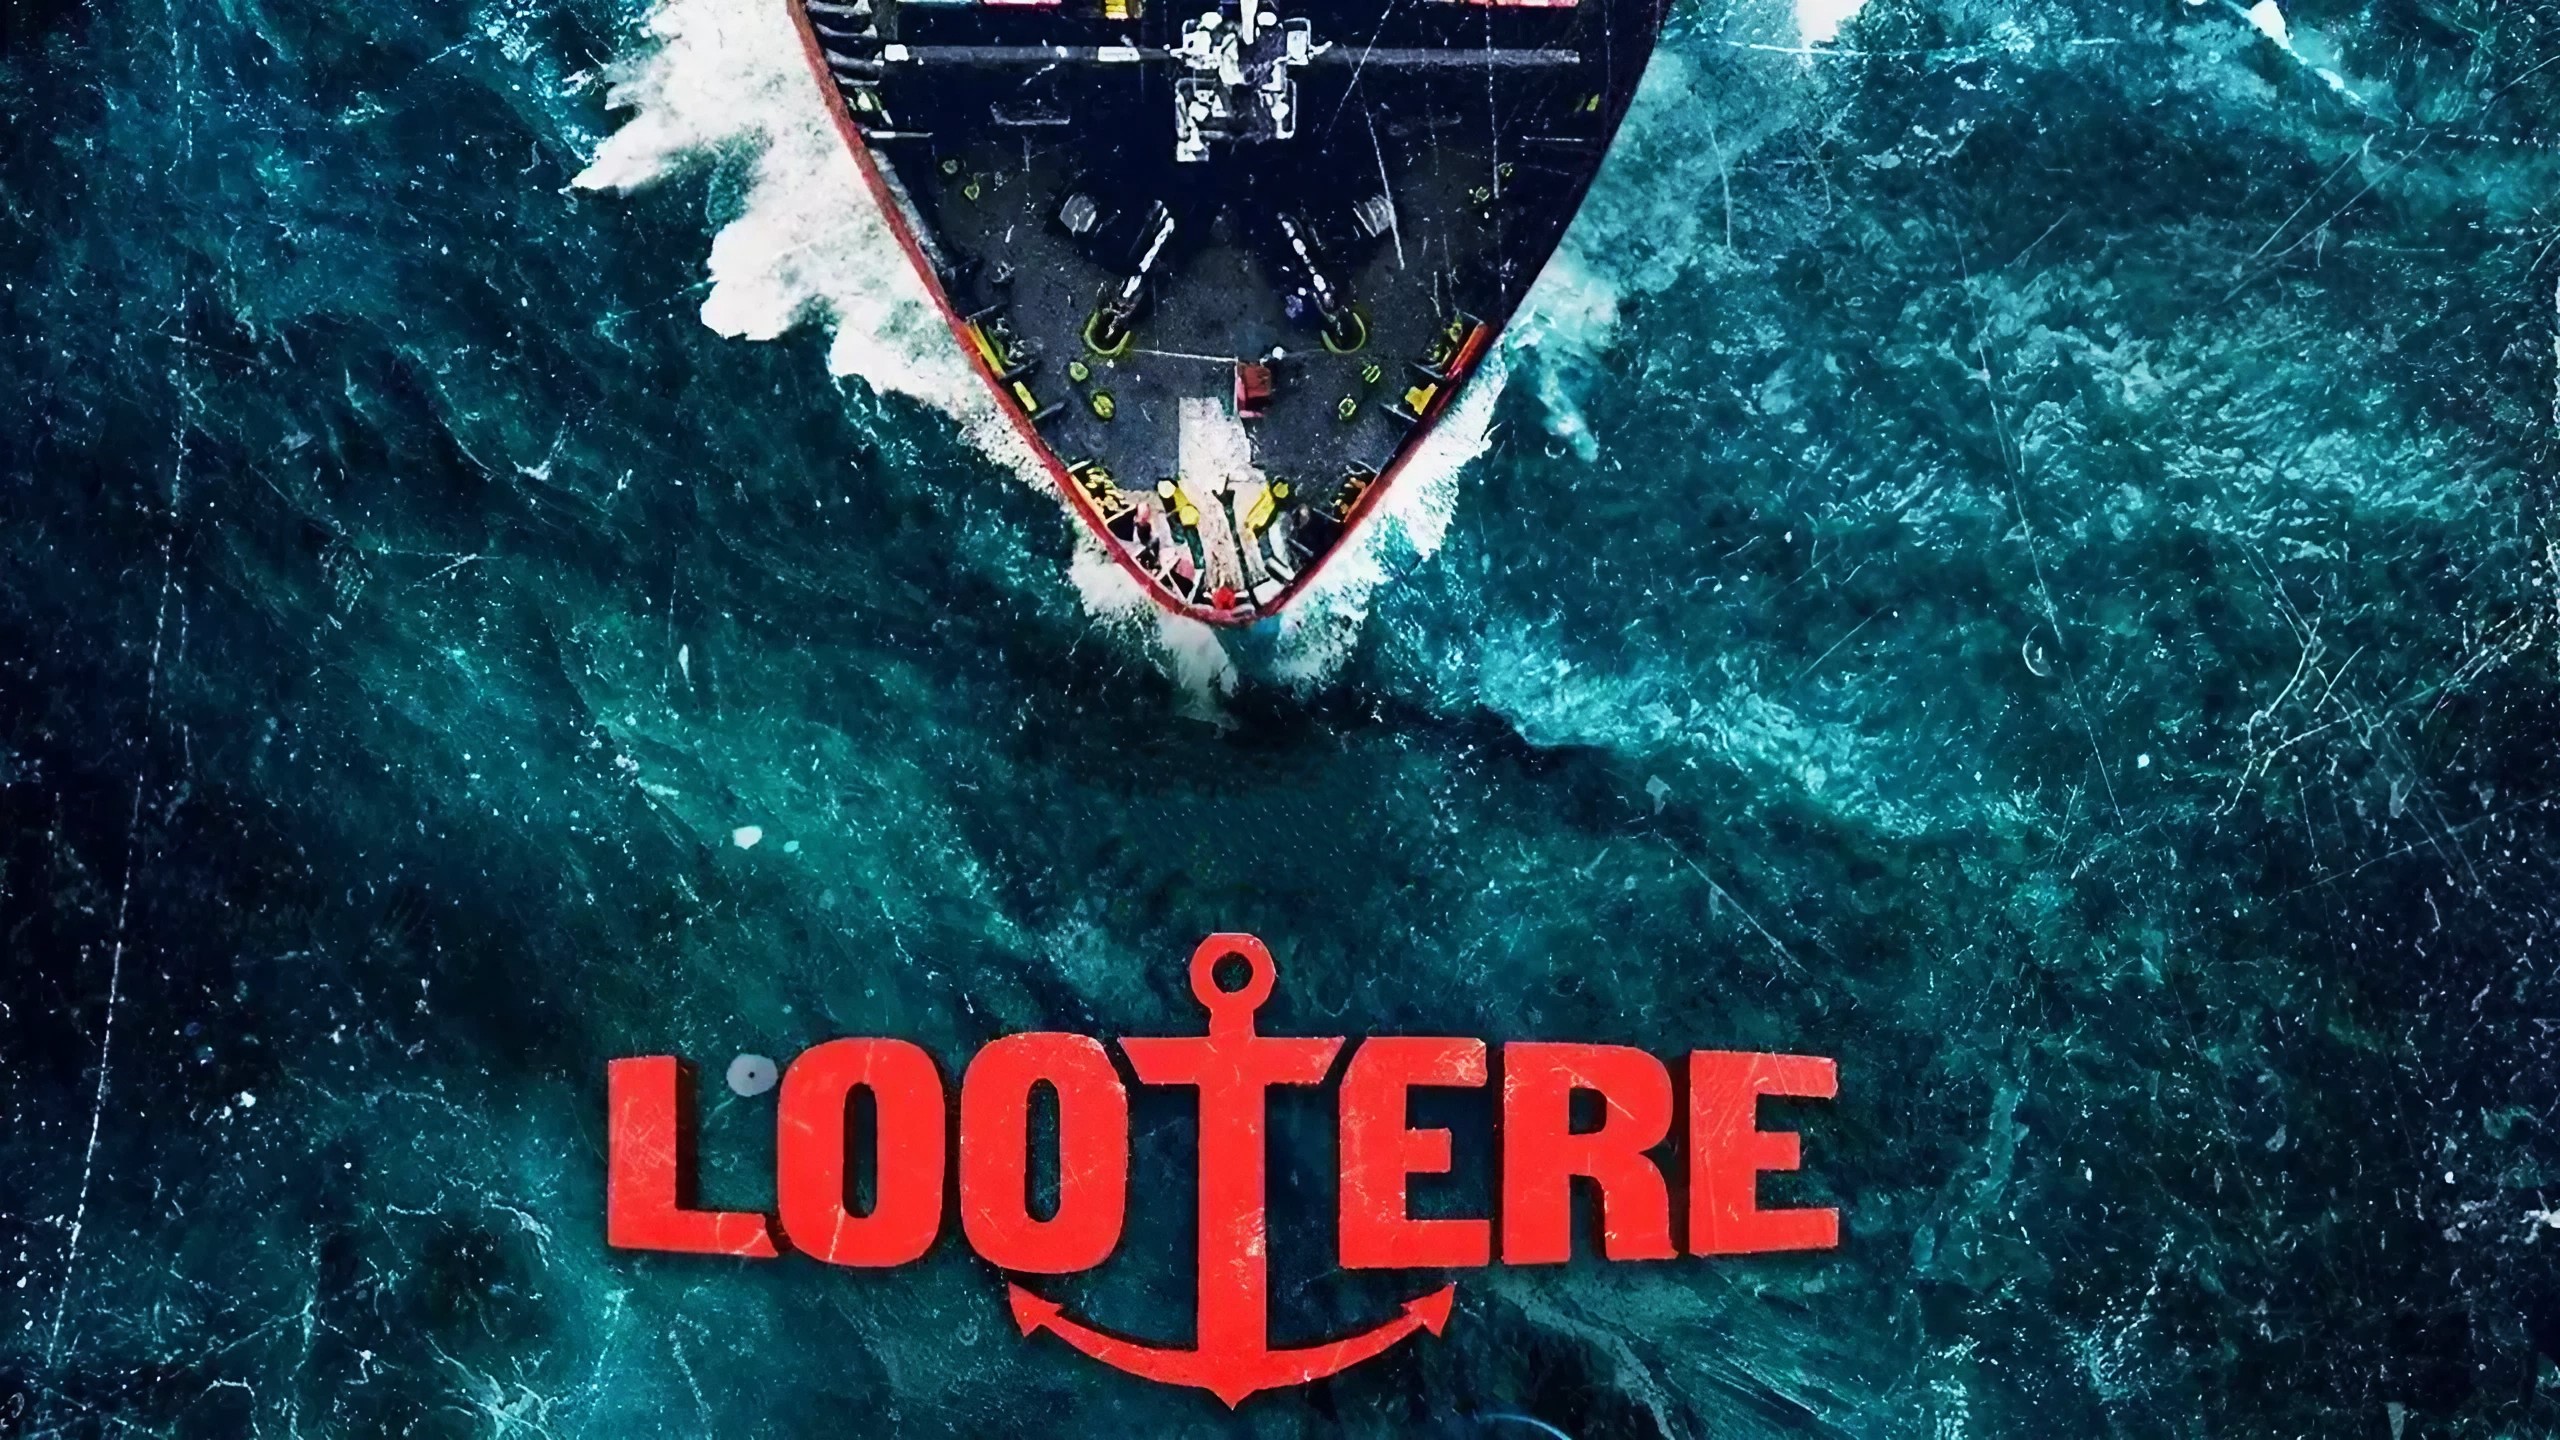 Is lootere based on a true story